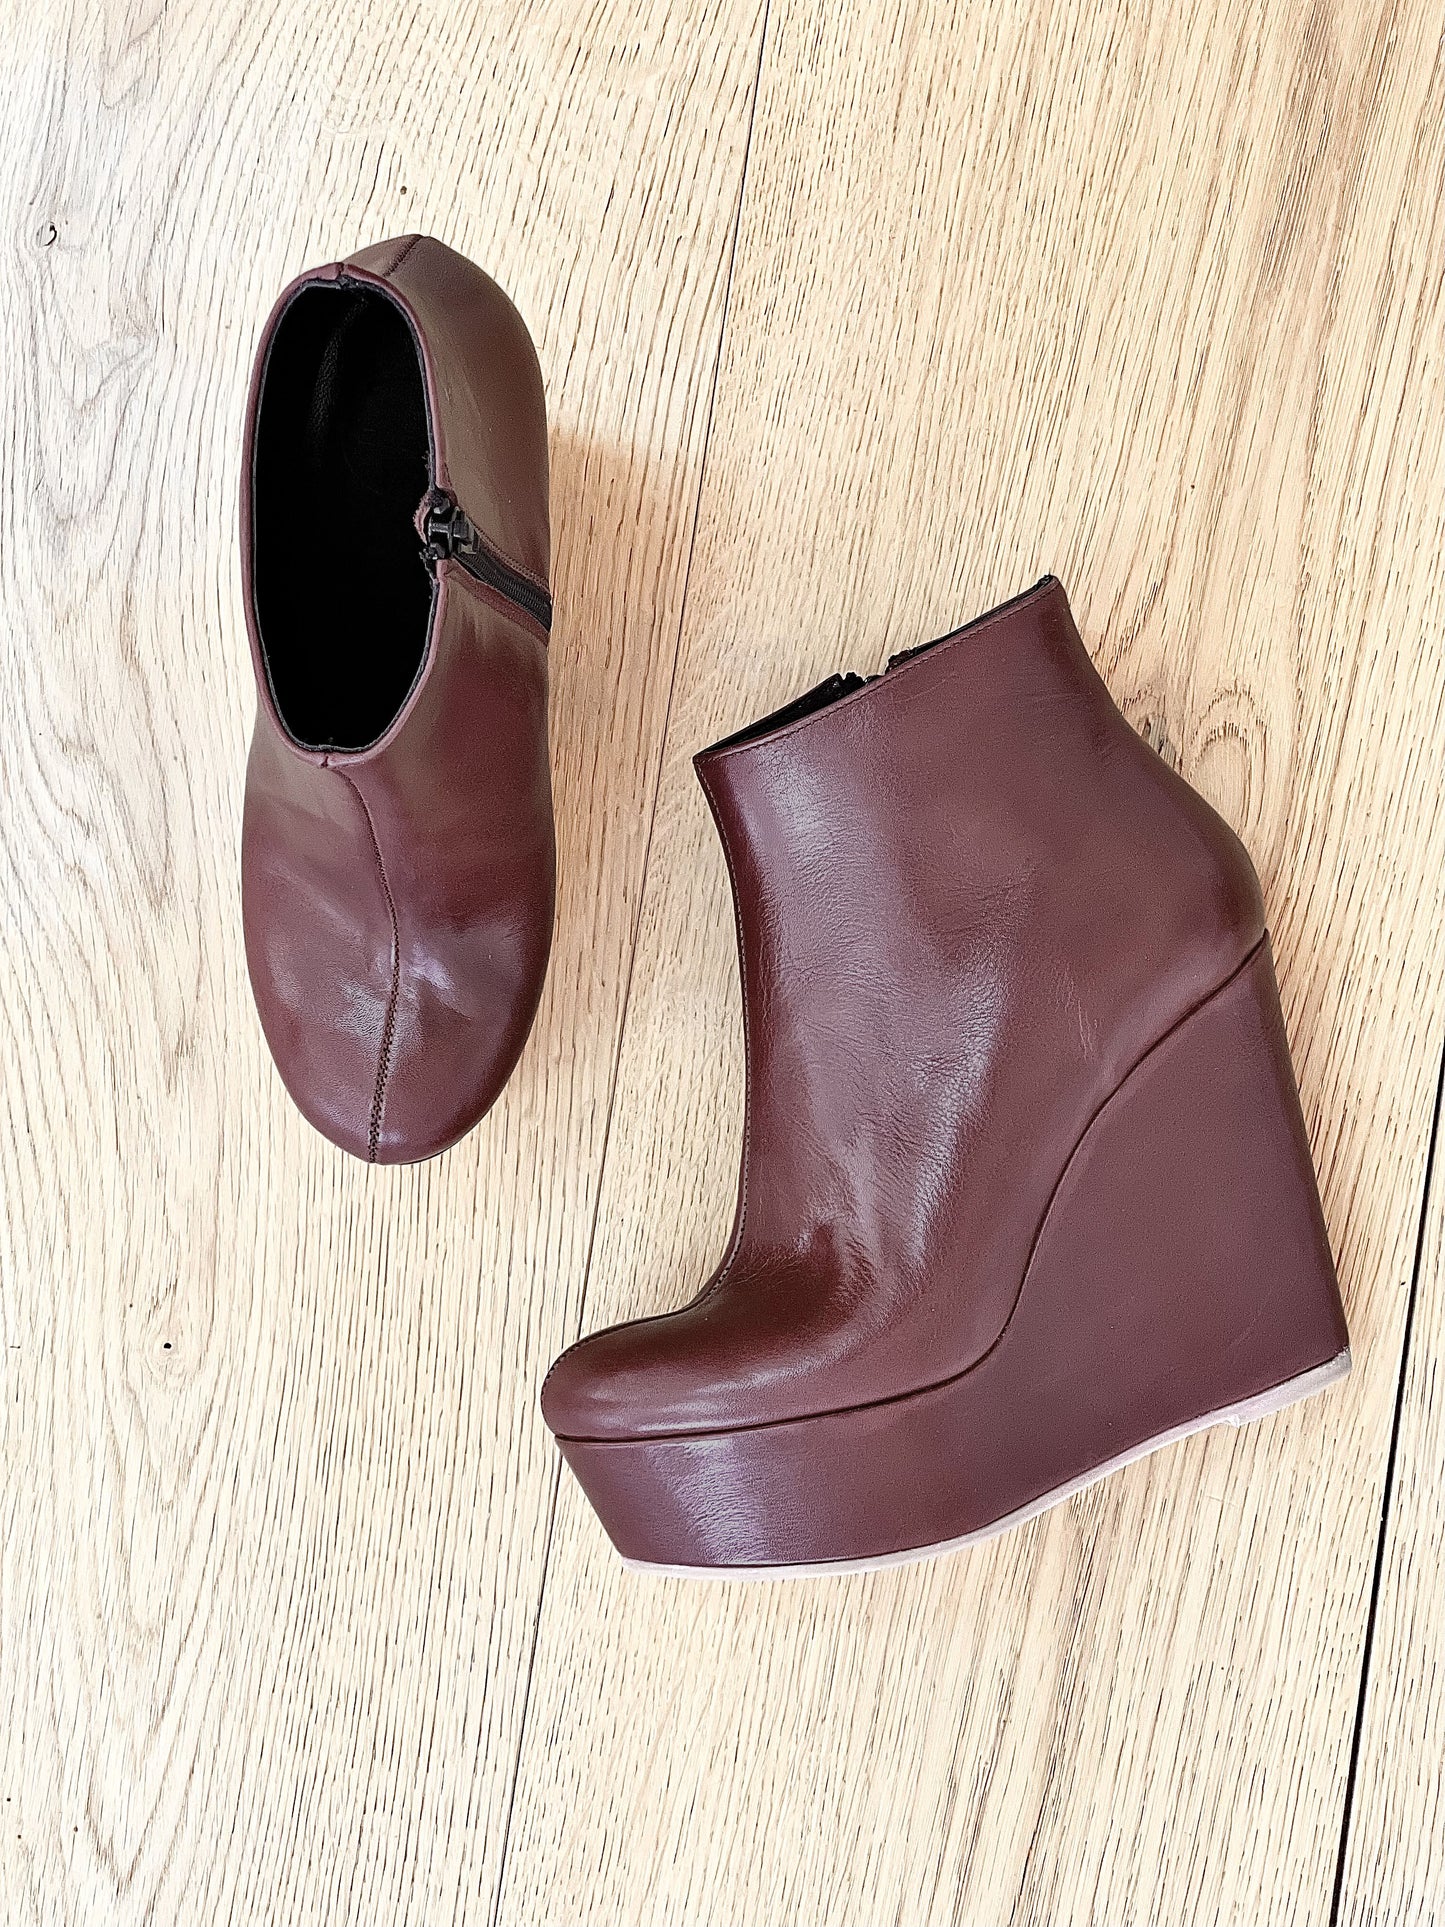 BROWN LEATHER BOOT